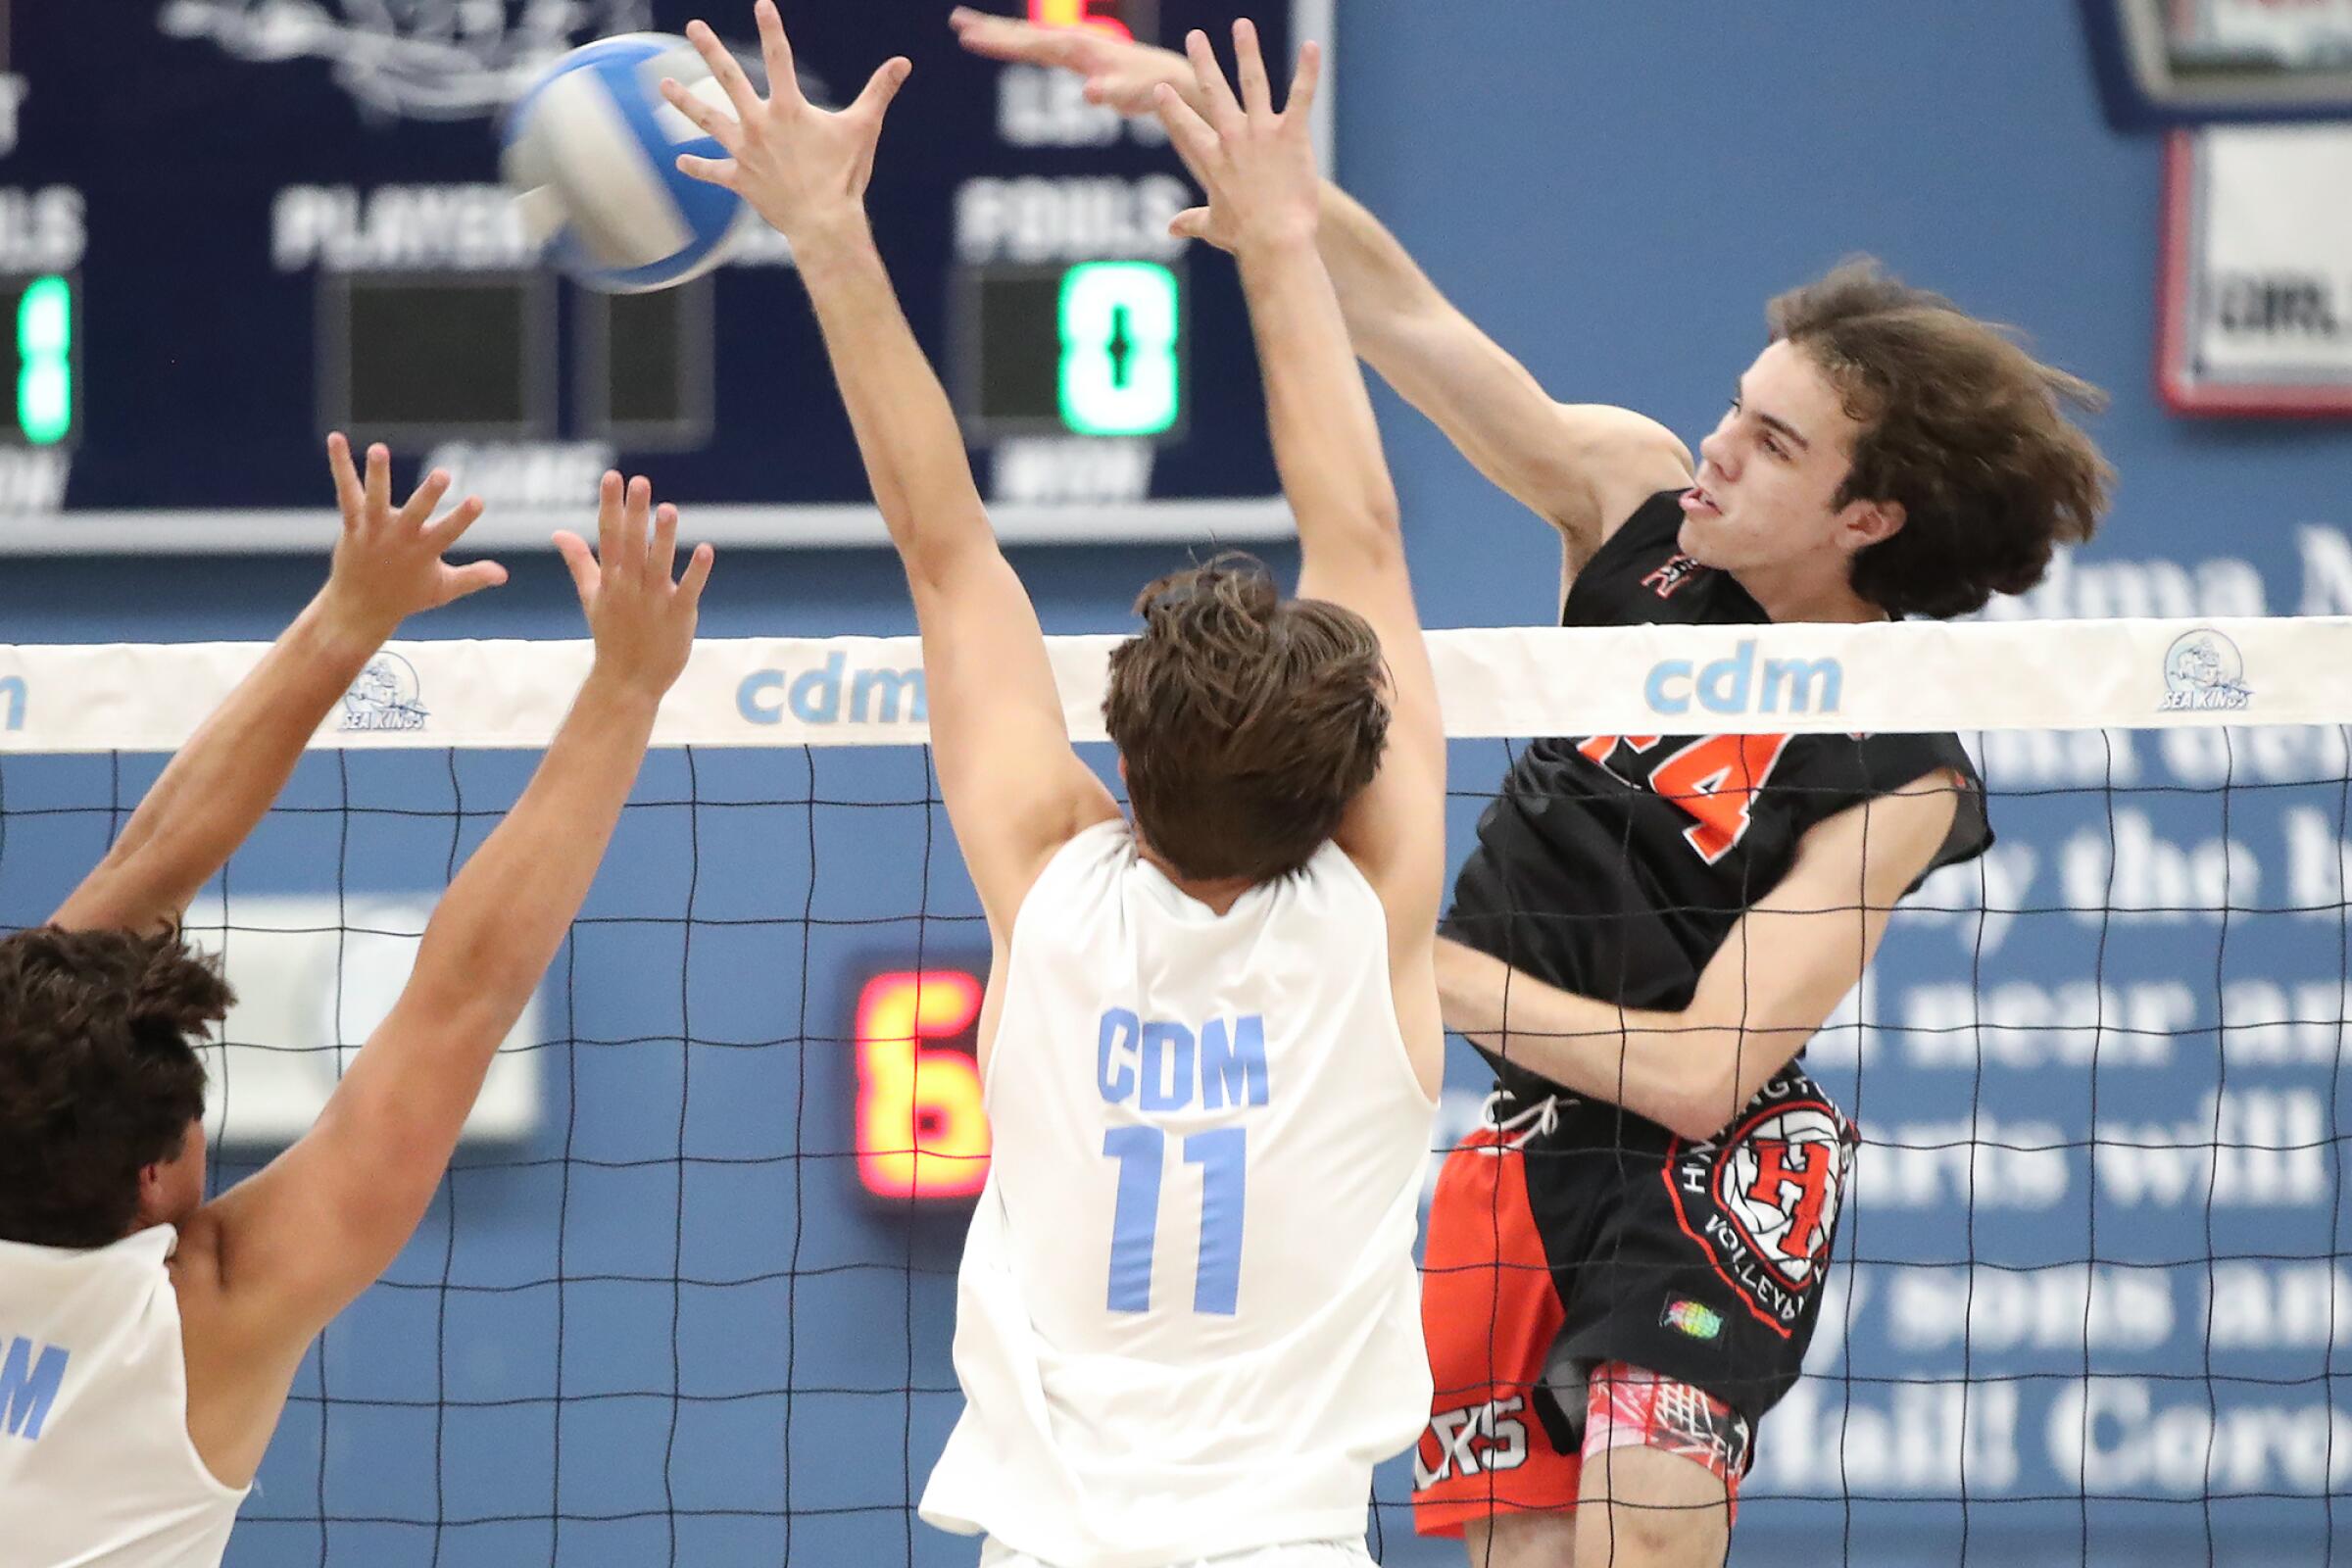 Nick Ganier (24) of Huntington Beach makes a kill past the block of Sterling Foley (11) during Surf League boys' volleyball match on Wednesday.